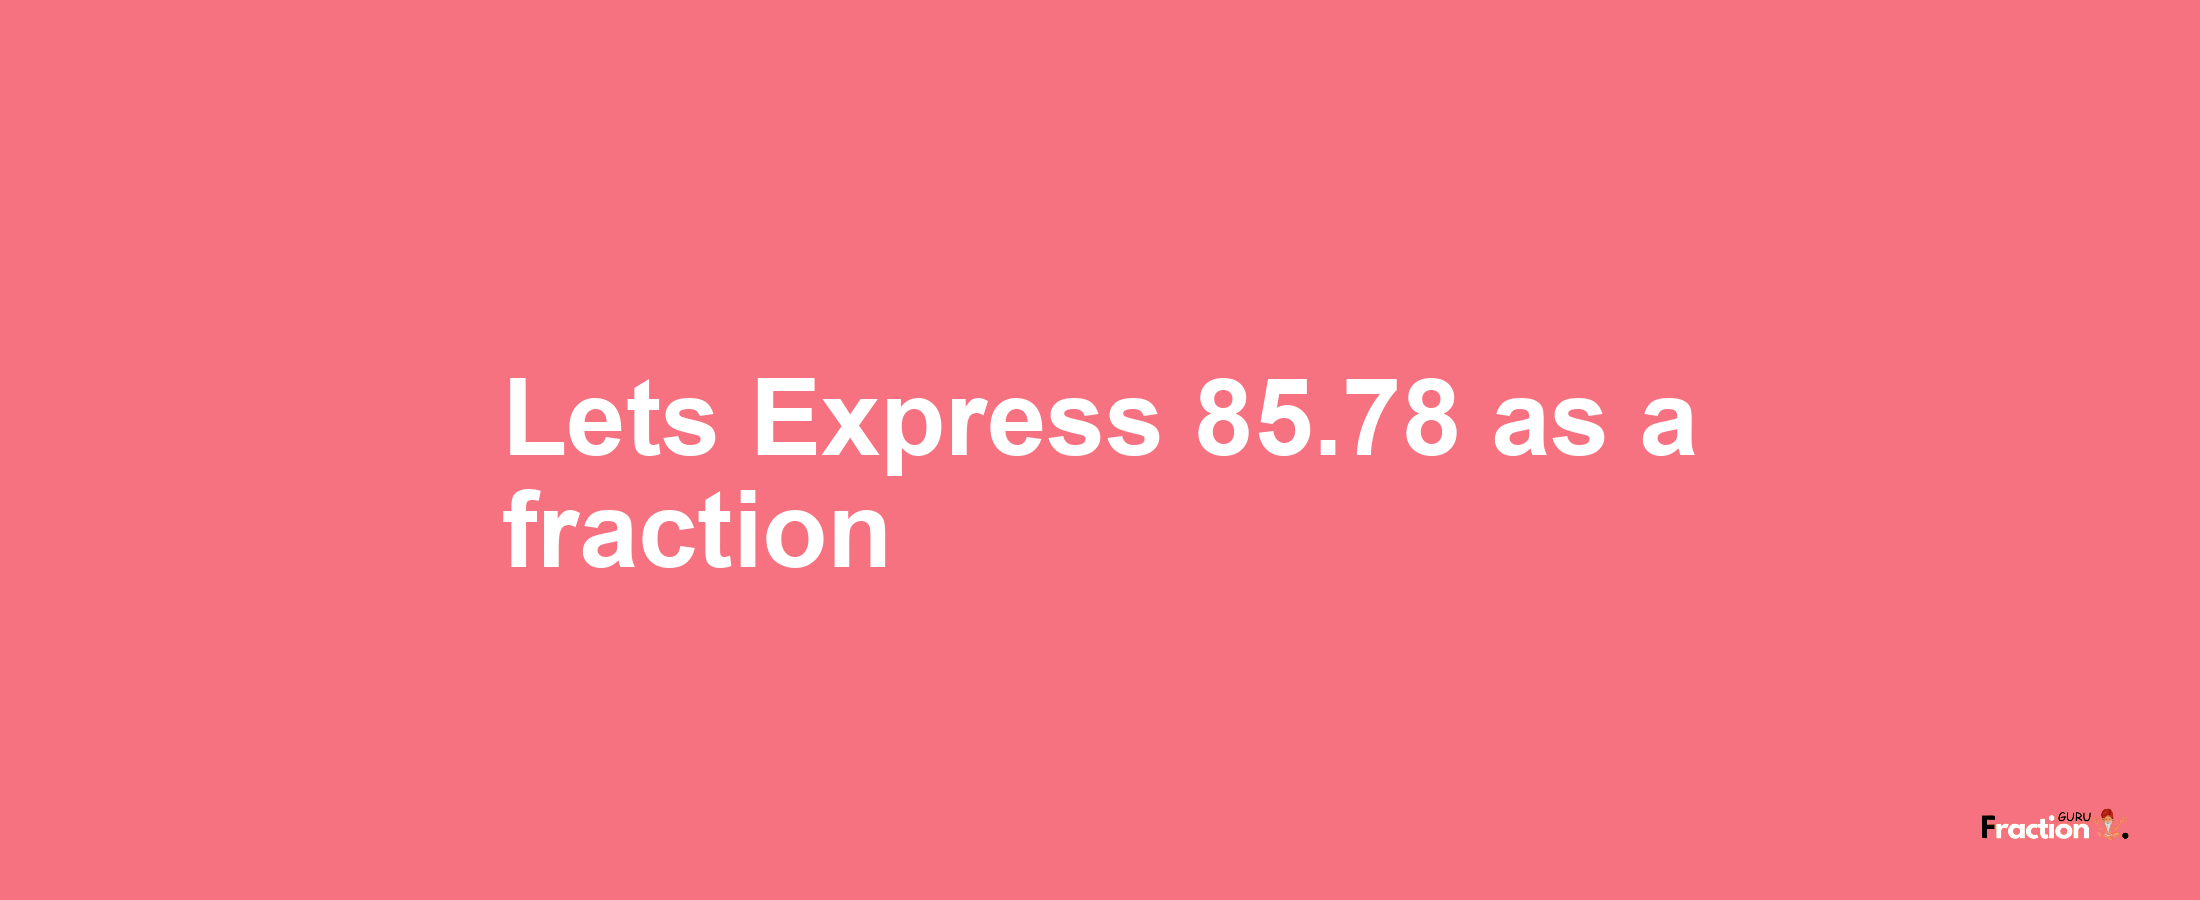 Lets Express 85.78 as afraction